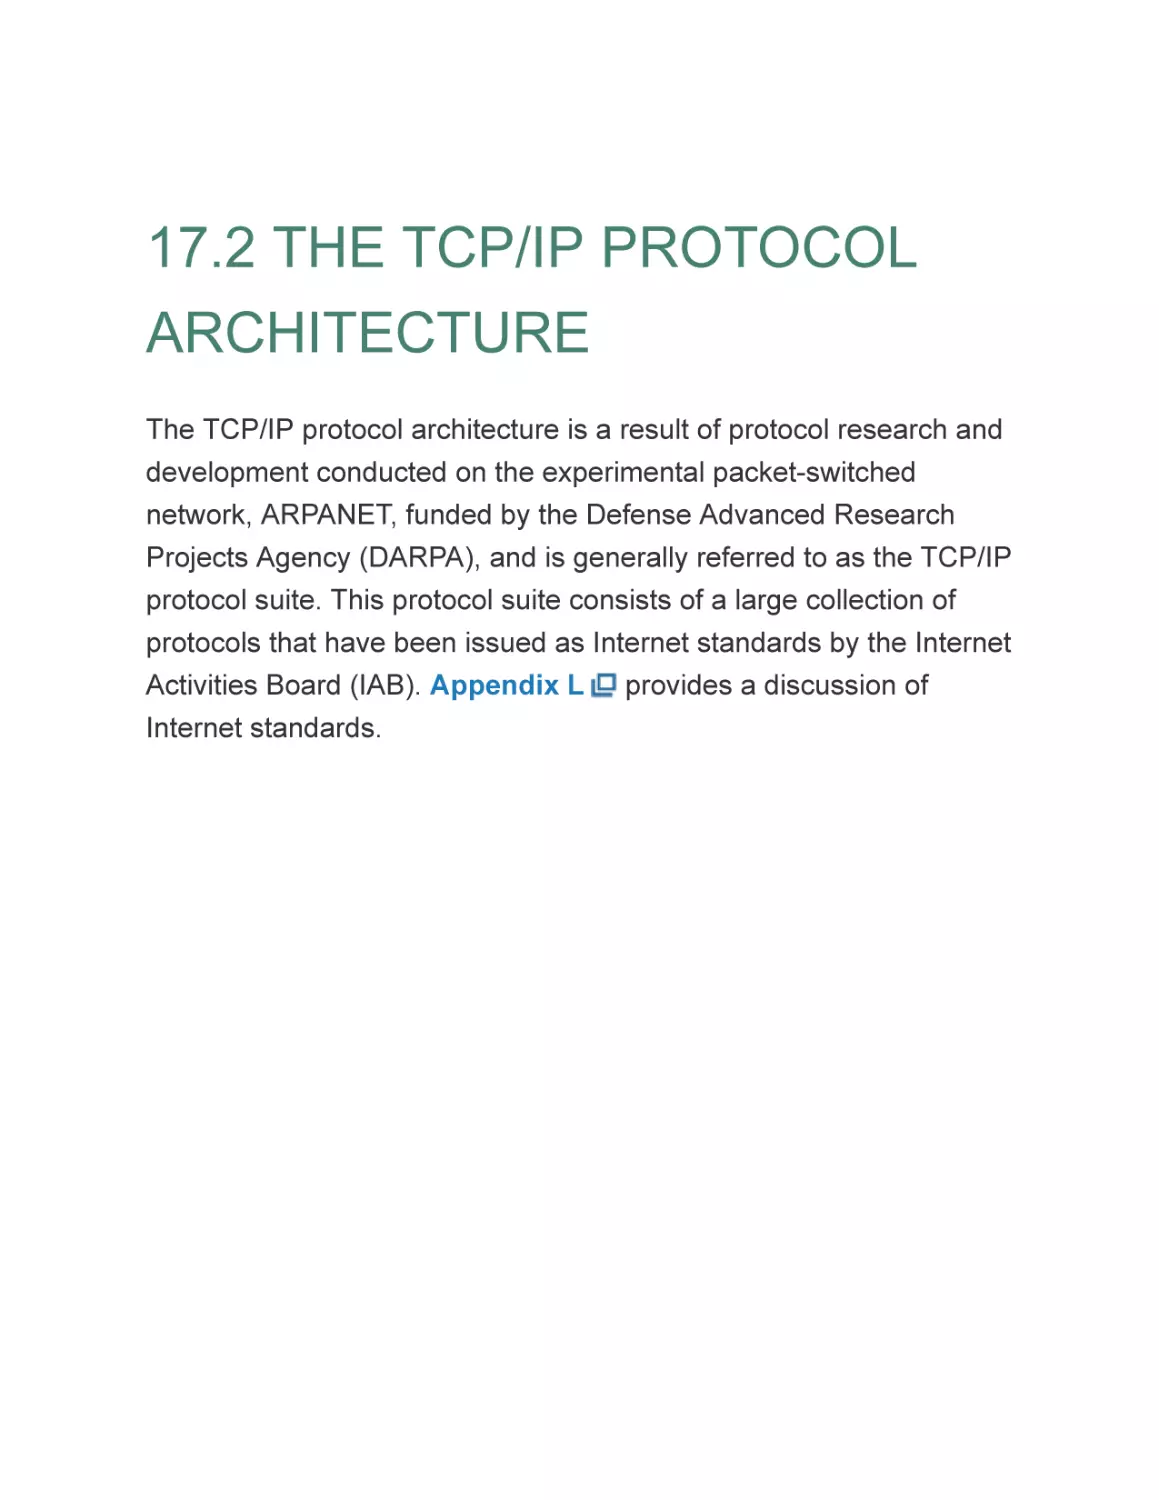 17.2 THE TCP/IP PROTOCOL ARCHITECTURE